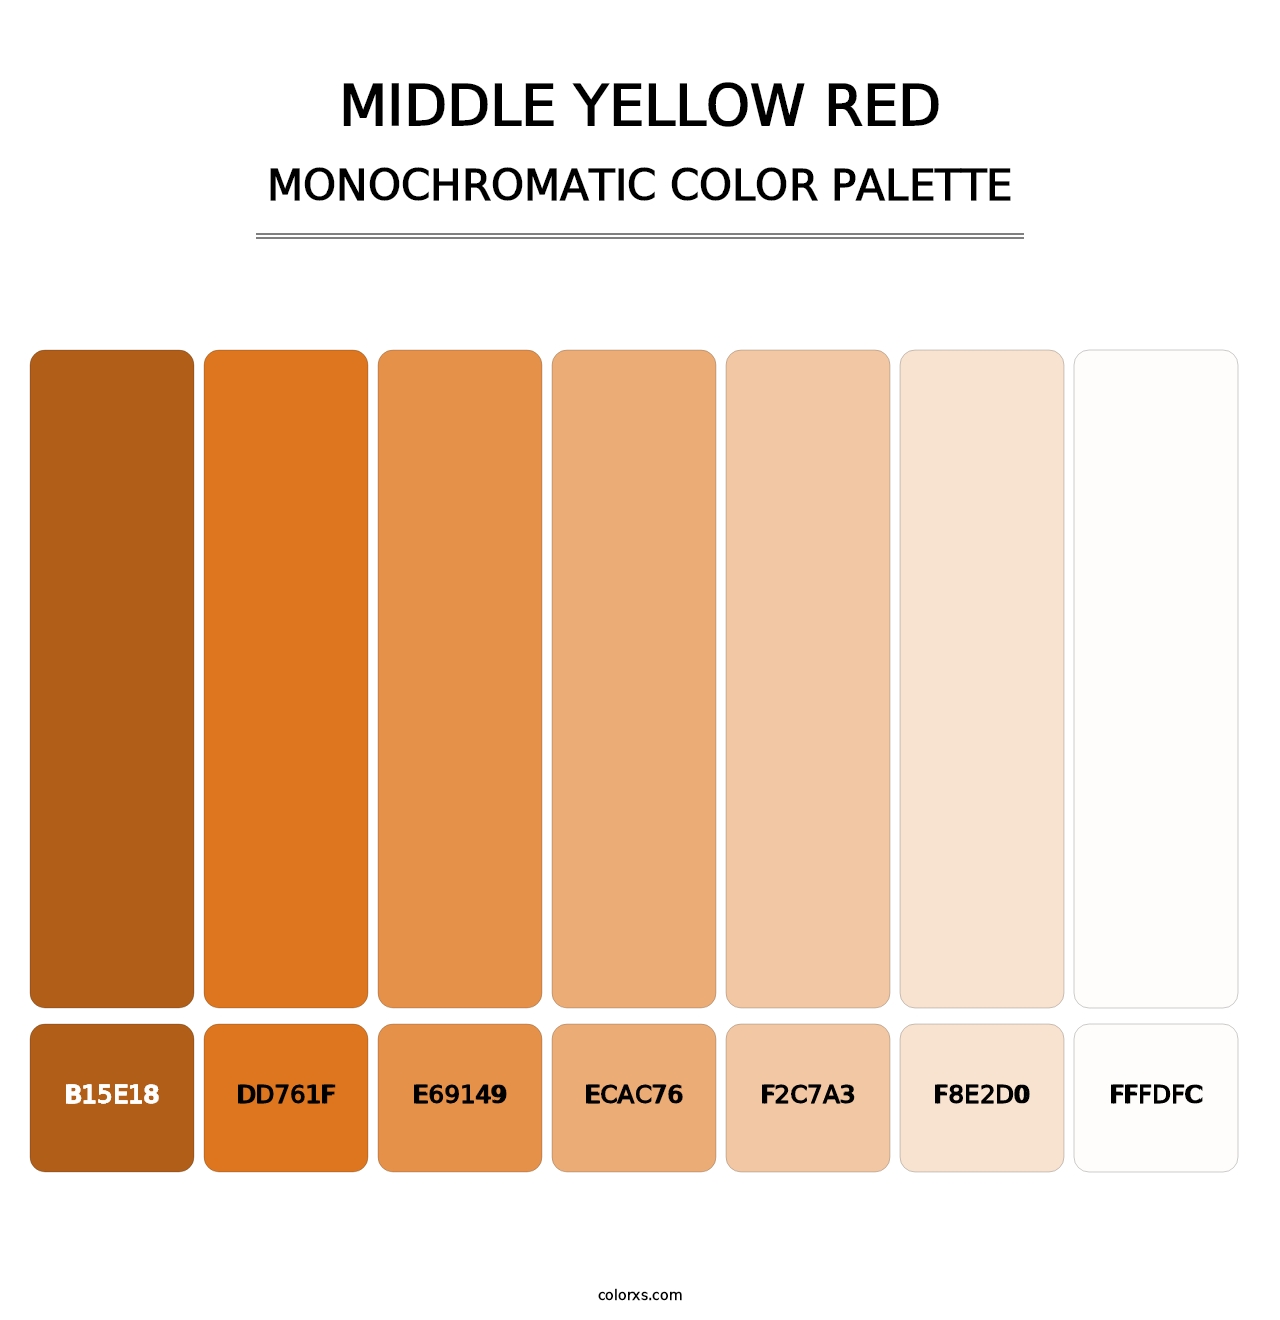 Middle Yellow Red - Monochromatic Color Palette